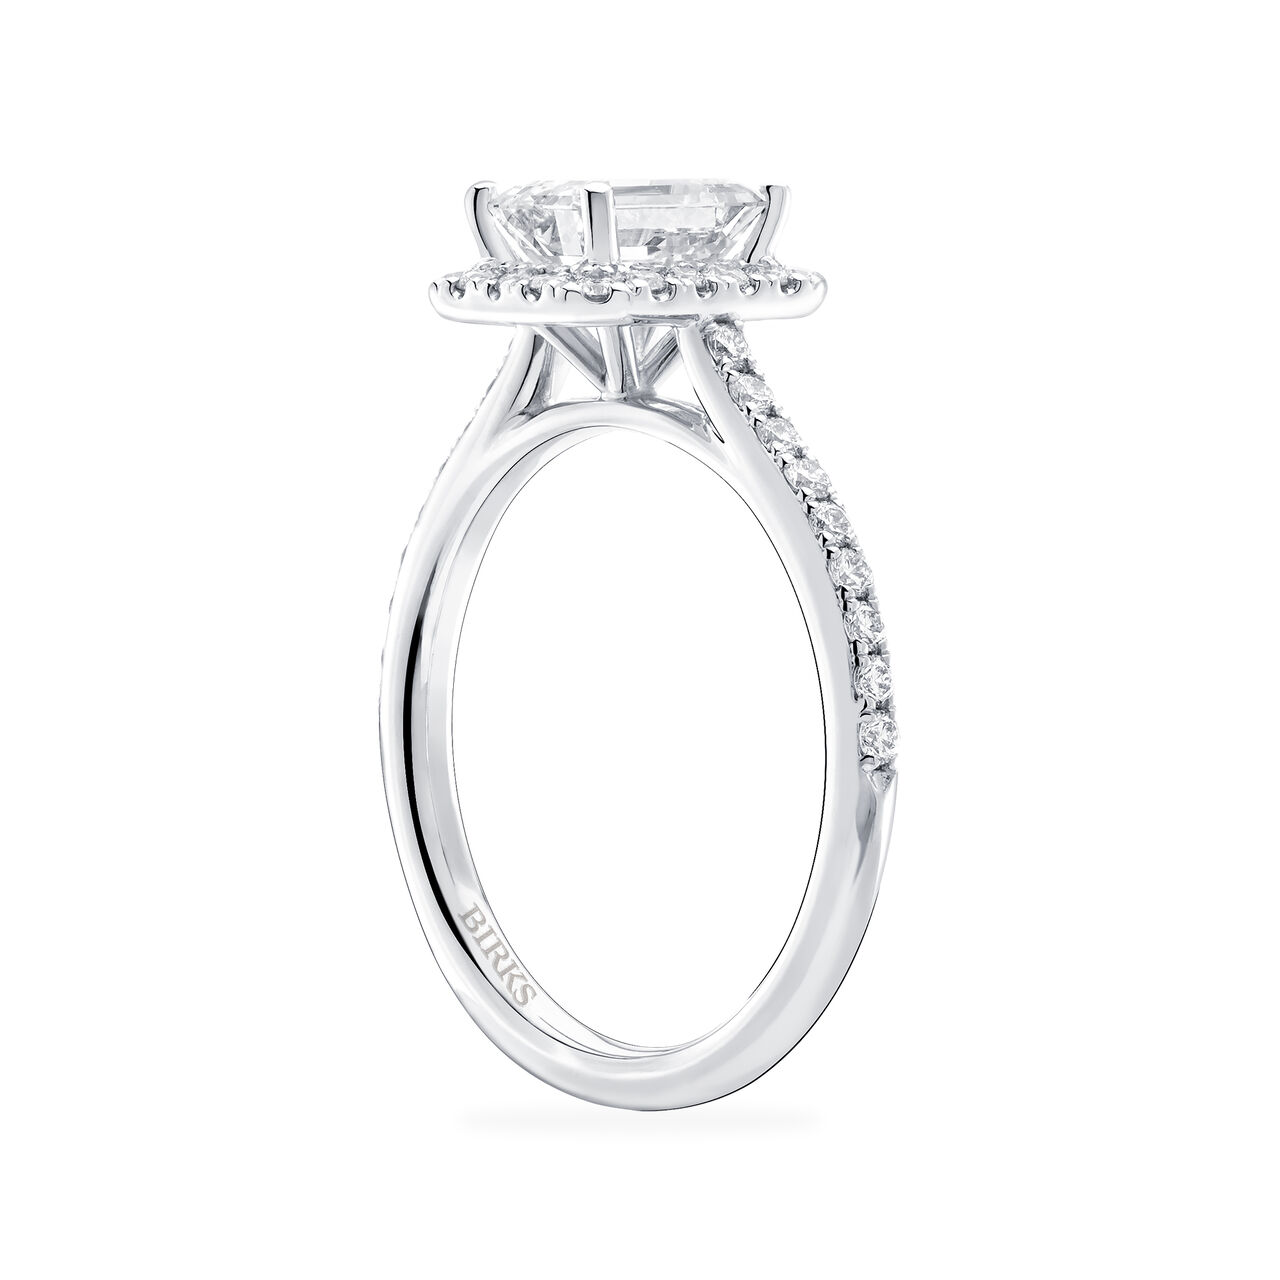 Emerald Cut Diamond Engagement Ring with Halo and PavÃ©  Band-5-51-01-G-VS1-platinum